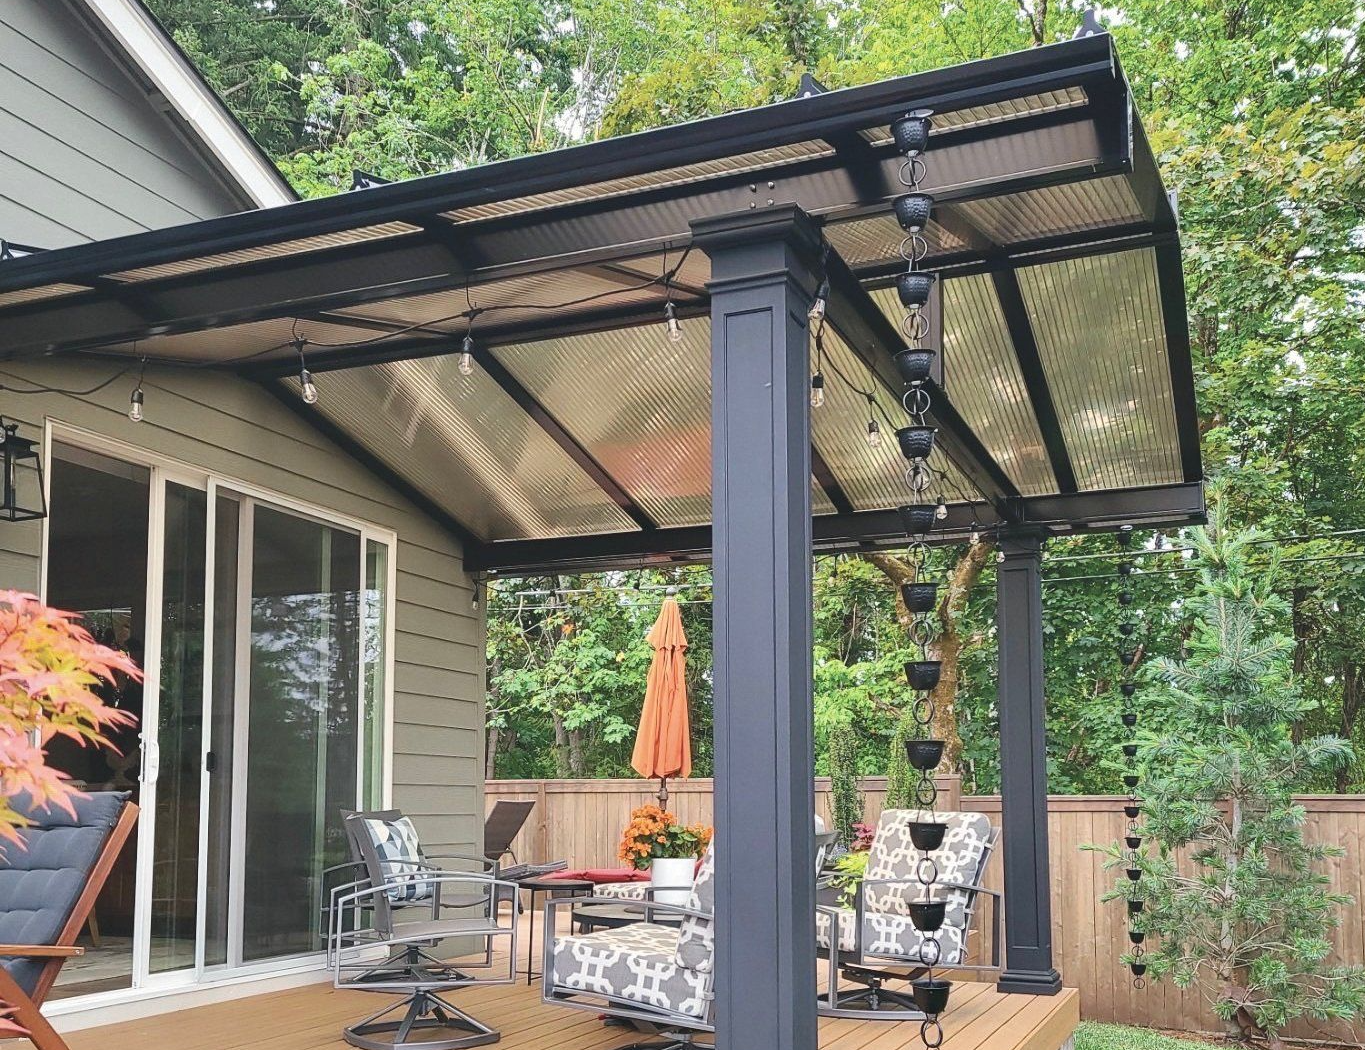 Patio Covers in Vancouver Washington - Gable Roof with ACRYLITE Acrylic